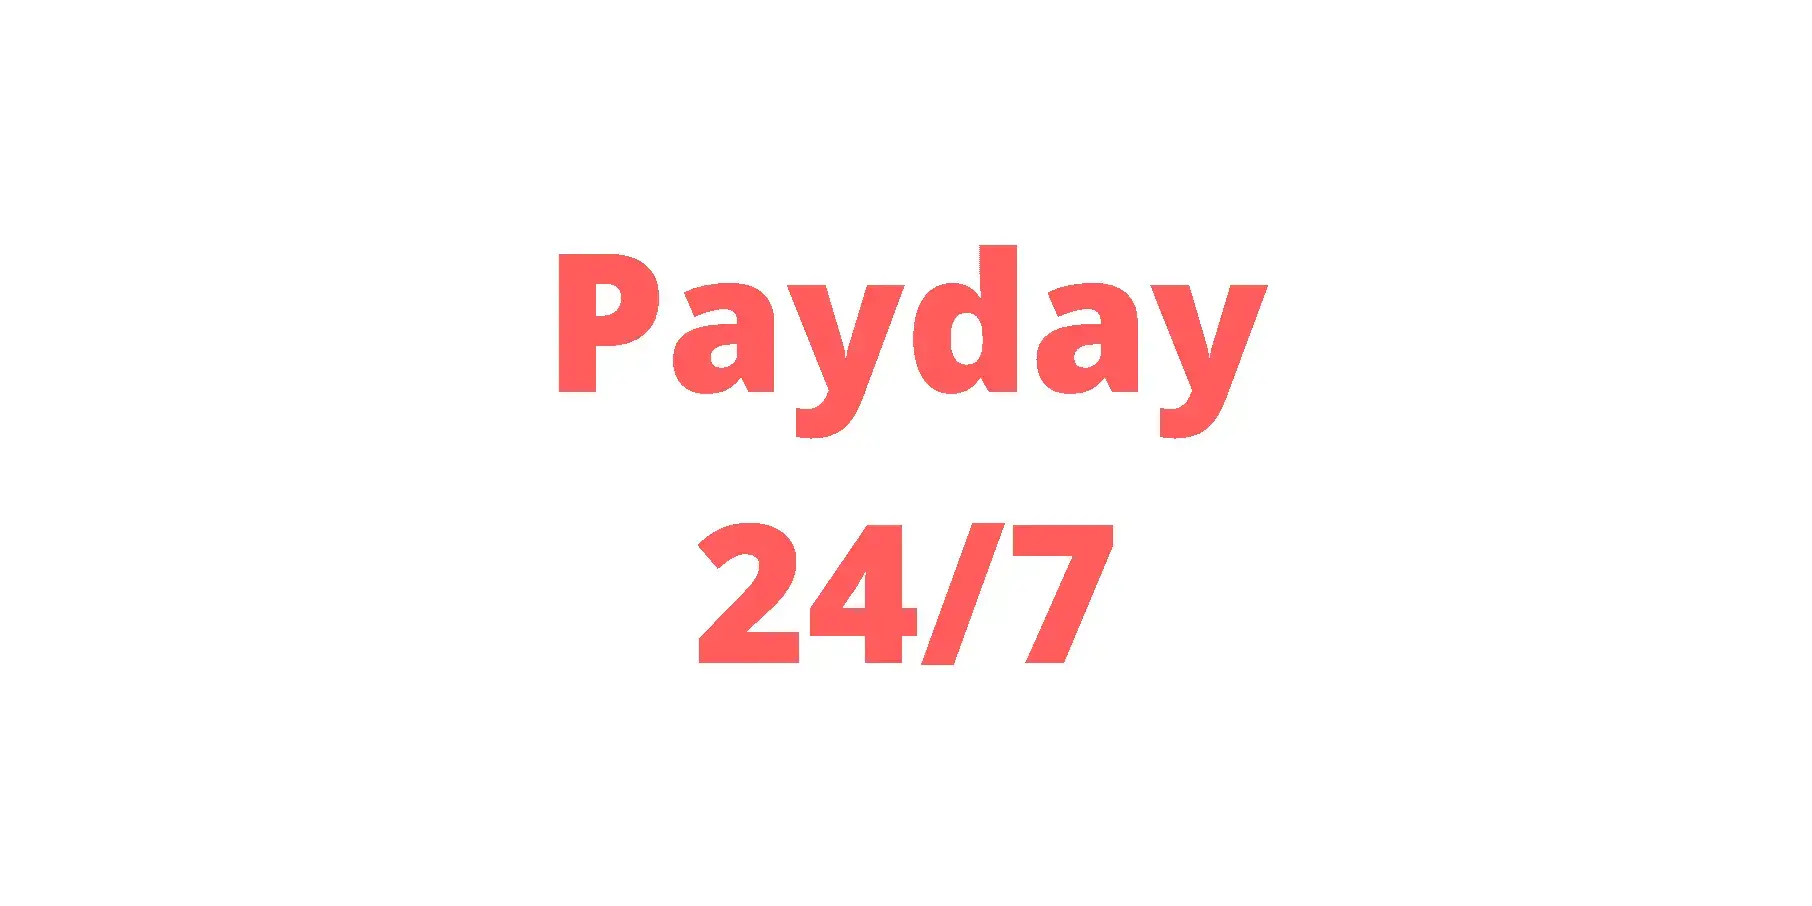 Payday 24/7